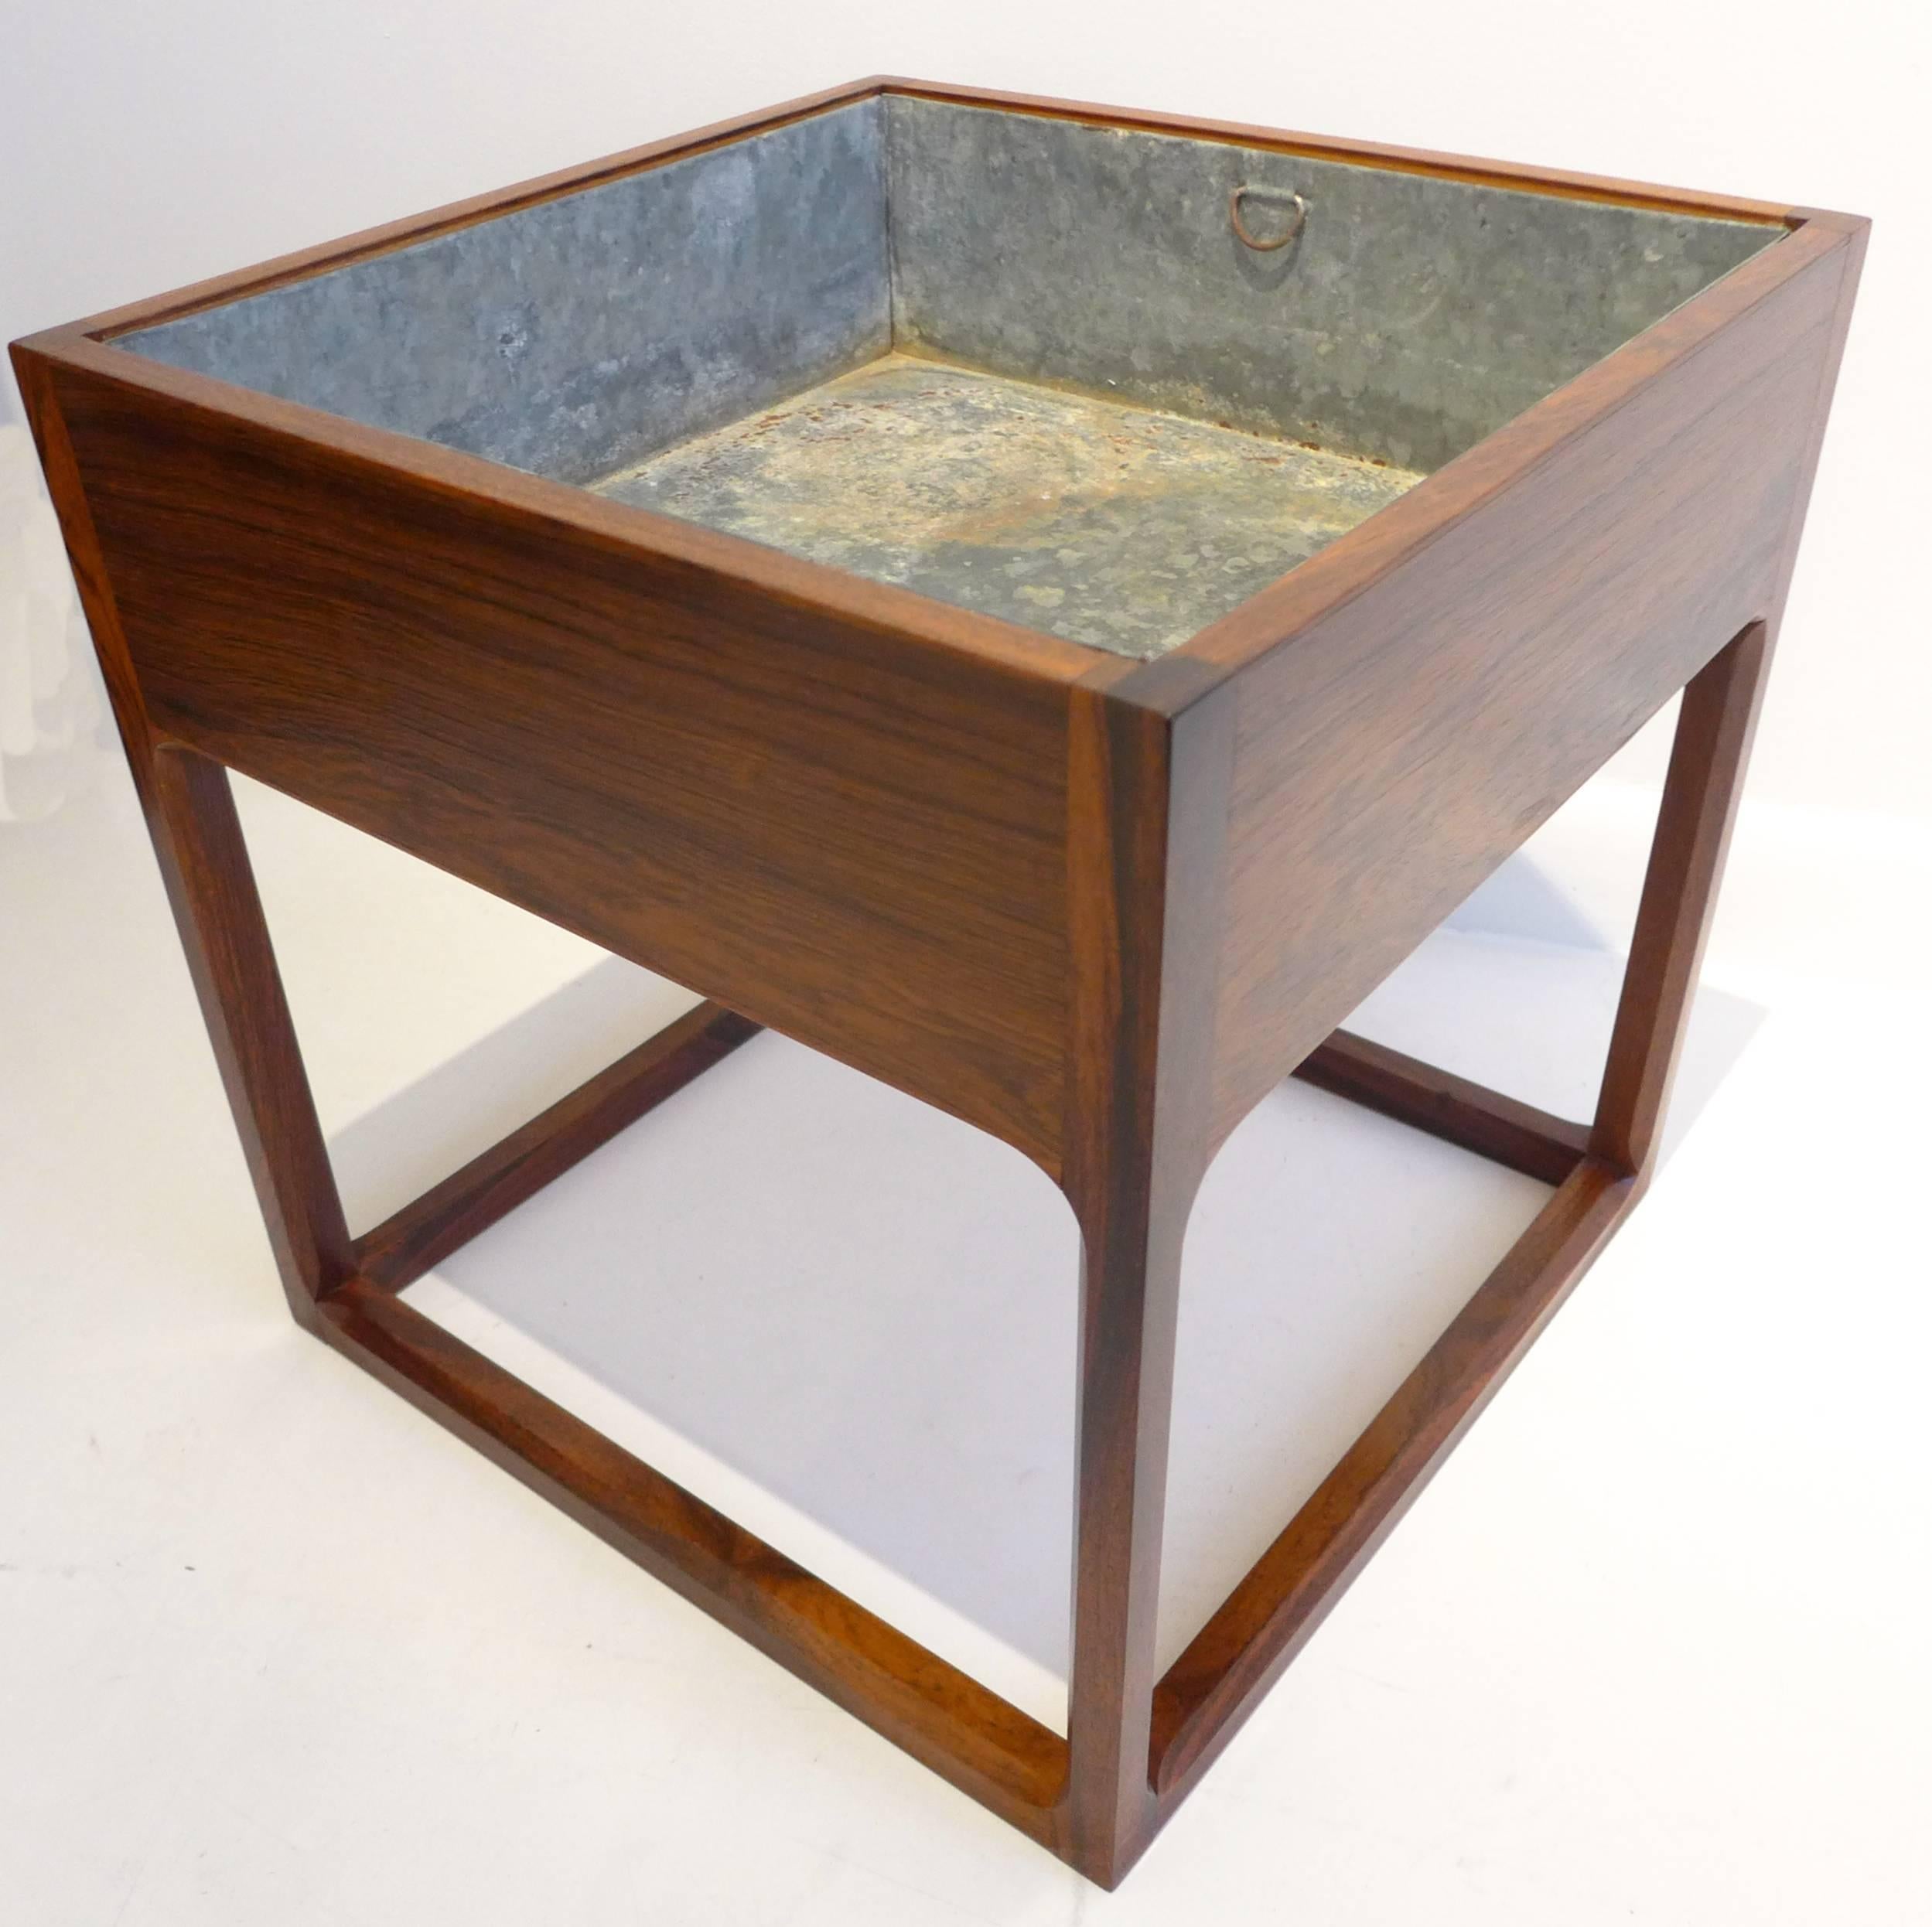 Cubic planter with chamfered legs, highly figured rosewood veneer, and removable metal liner, by Danish designer Aksel Kjersgaard. Made by Feldballes Mobelfabrik, 1960s.